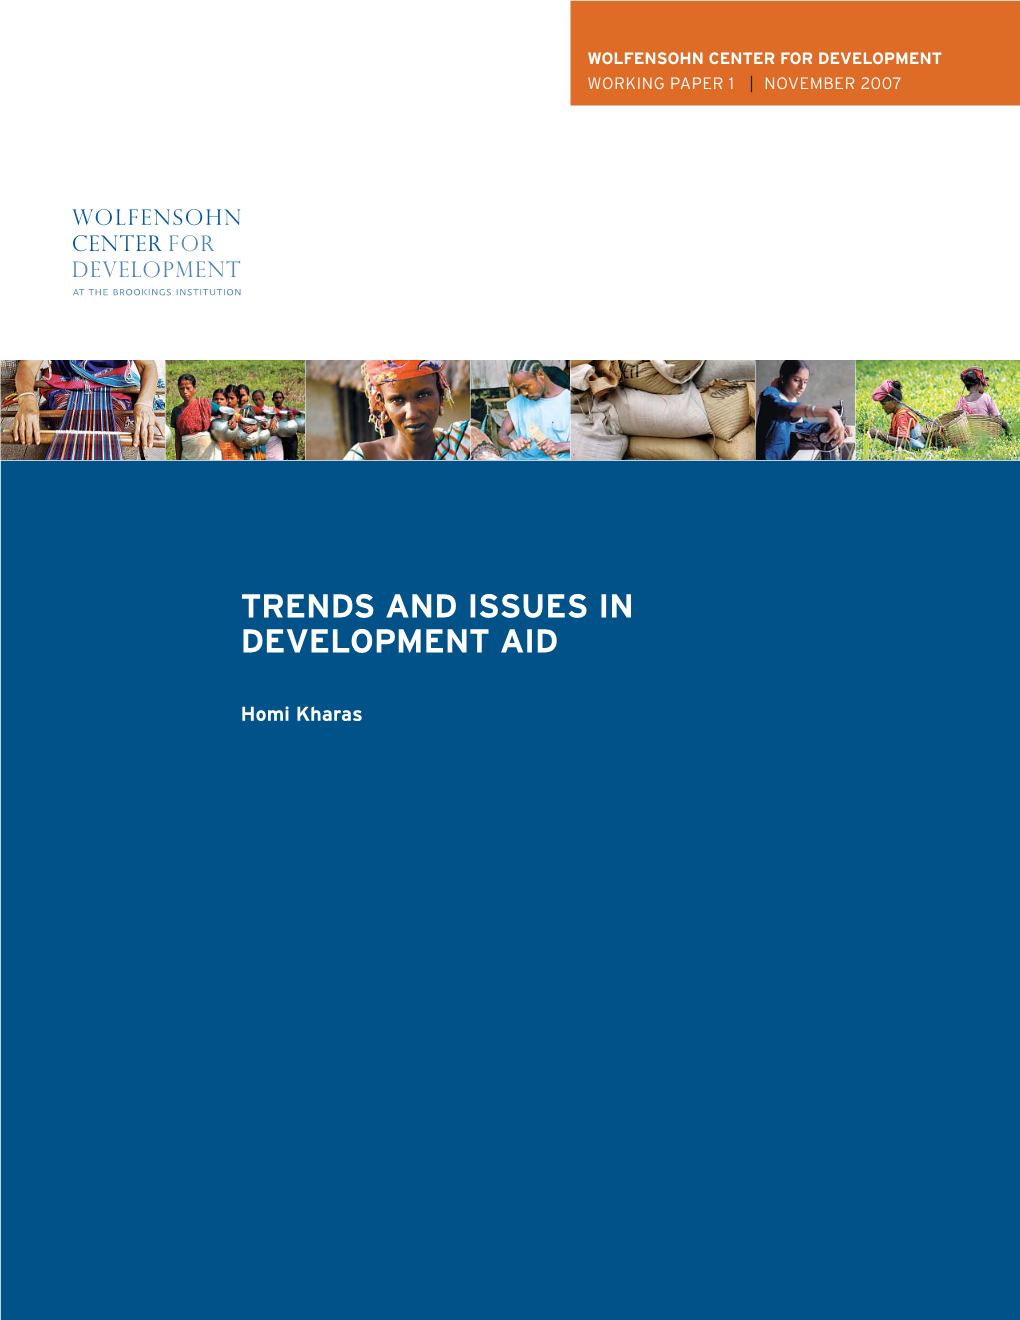 Trends and Issues in Development Aid